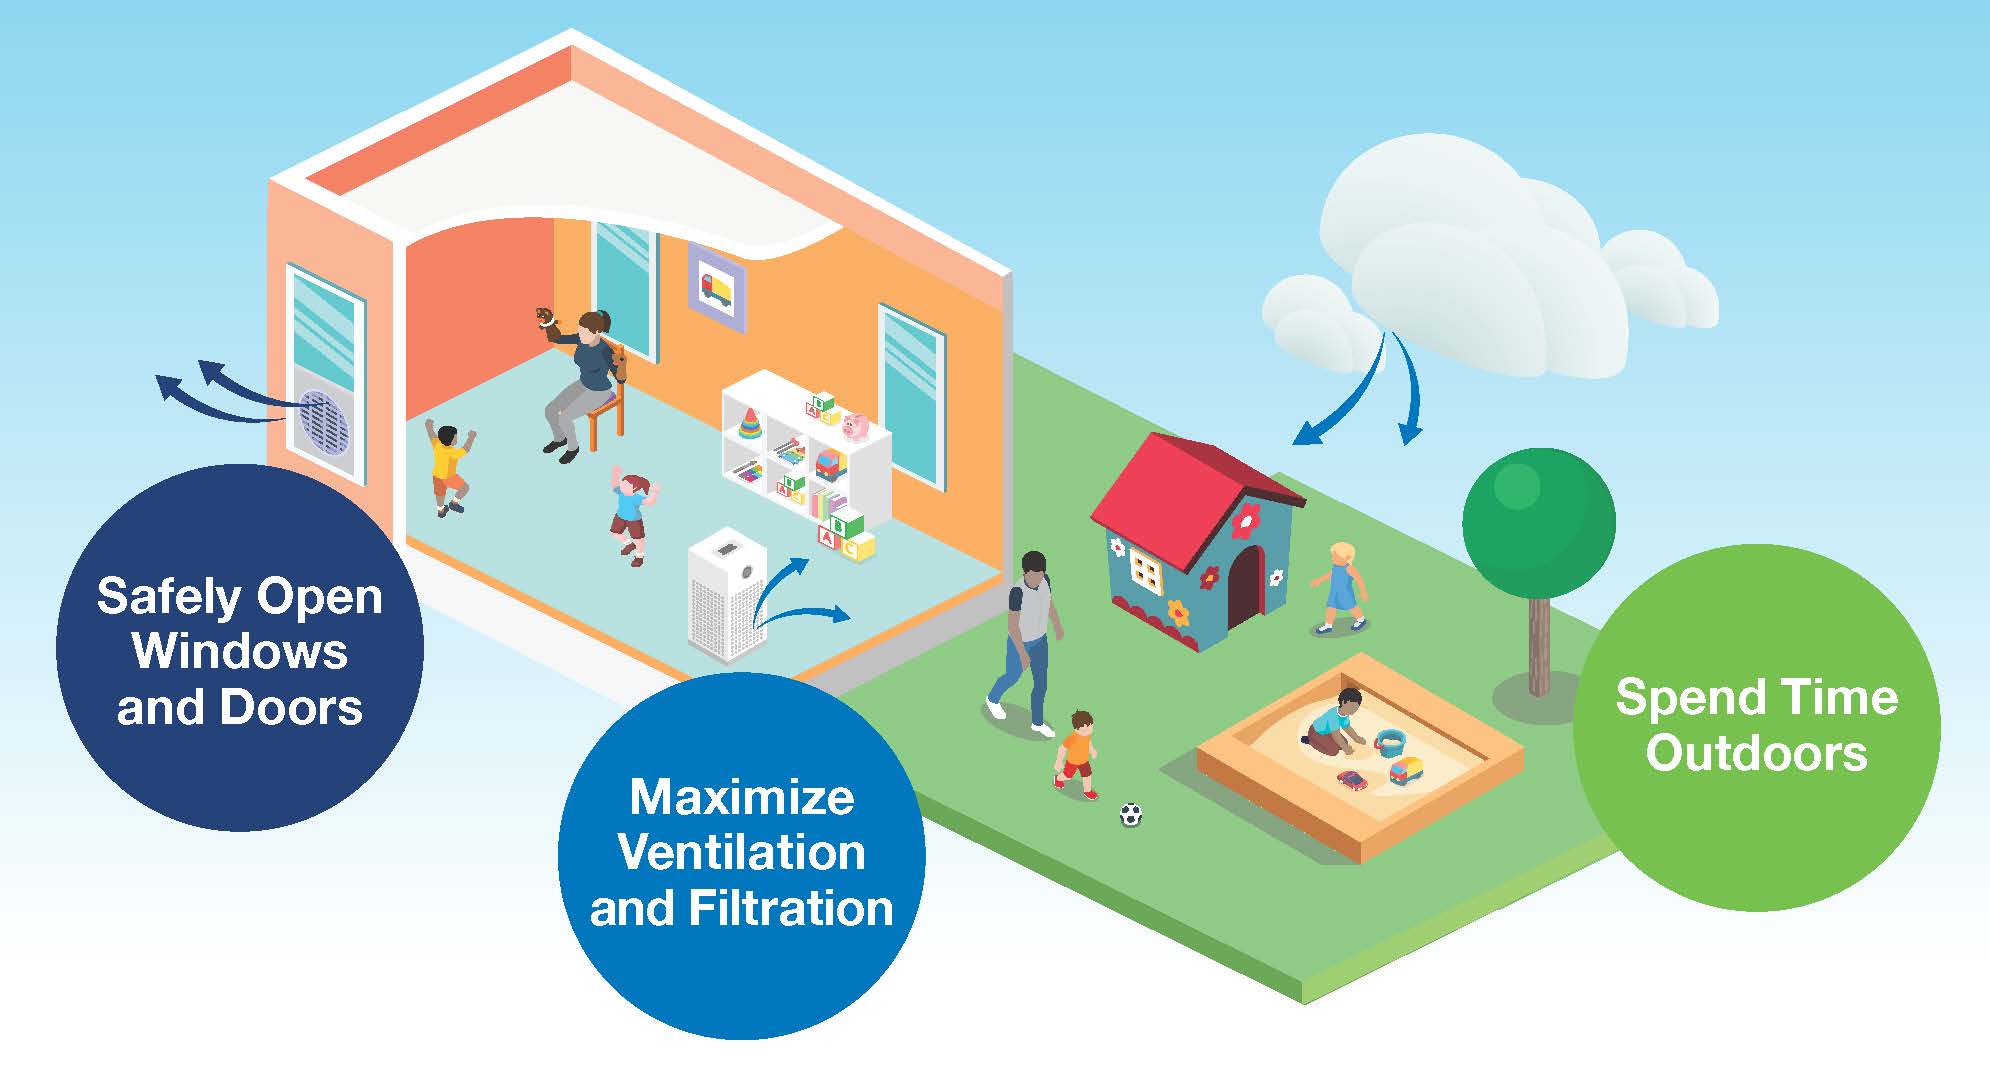 Spend time outdoors, safely open doors and windows, maximize ventilation and filtration